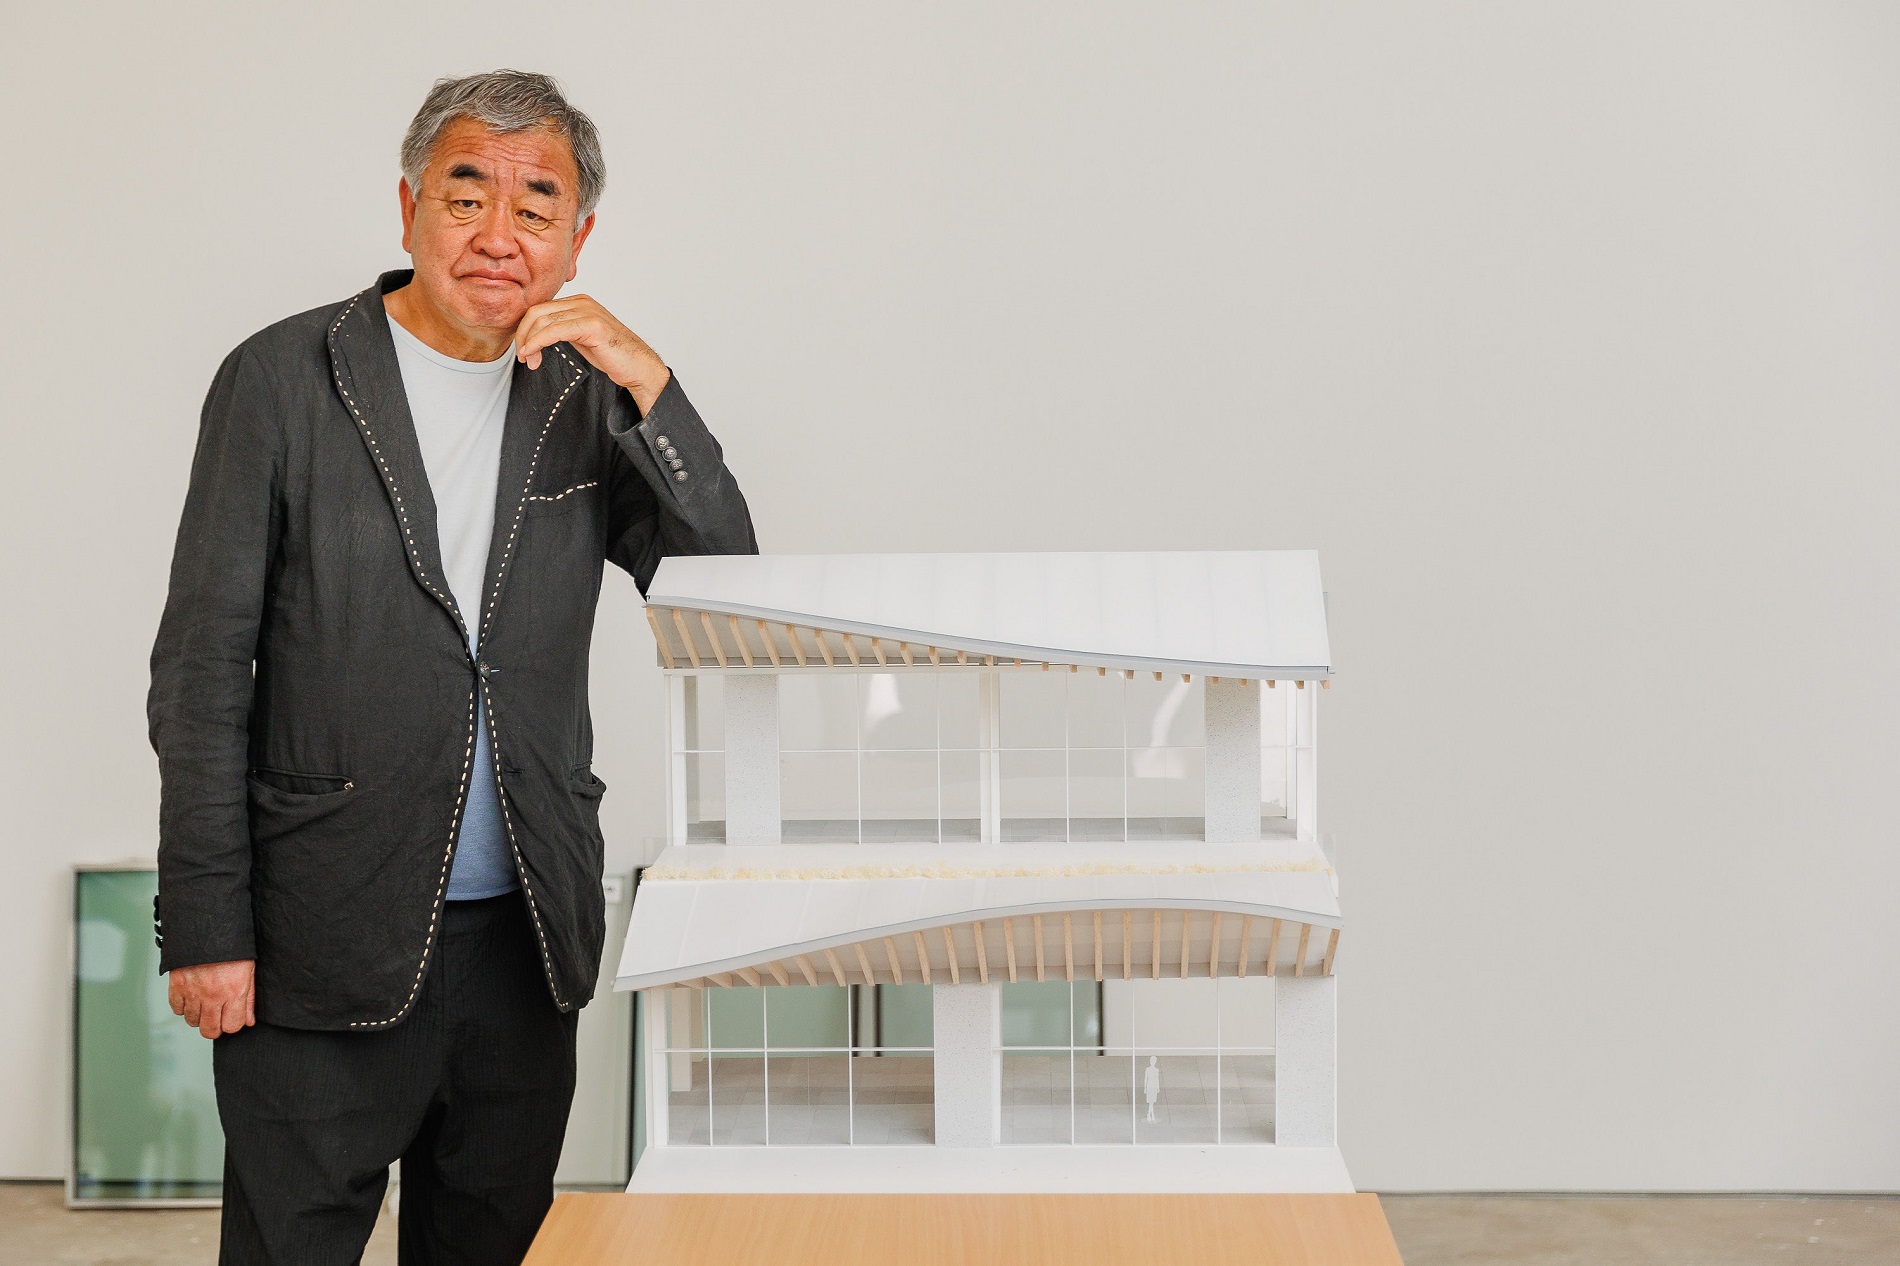 Kengo Kuma join forces with FENDI generating two new products in line